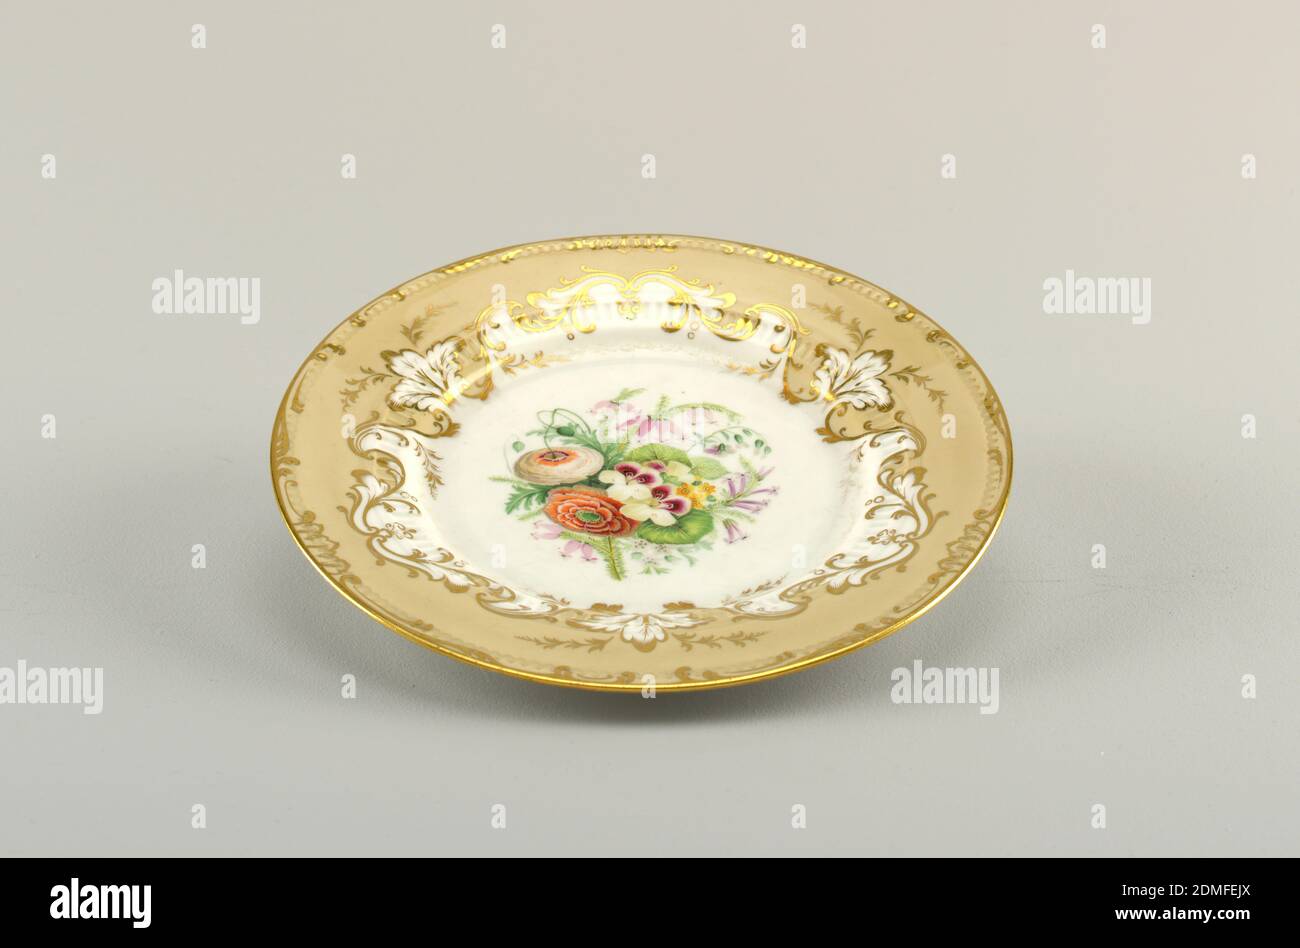 Plate, hard paste porcelain, vitreous enamel, gold, Flat marli and smooth rim. At center, white ground with overglaze florals. Surrounding this, a beige grown with gilt scrollwork., England, 1825–1842, ceramics, Decorative Arts, plate, plate Stock Photo